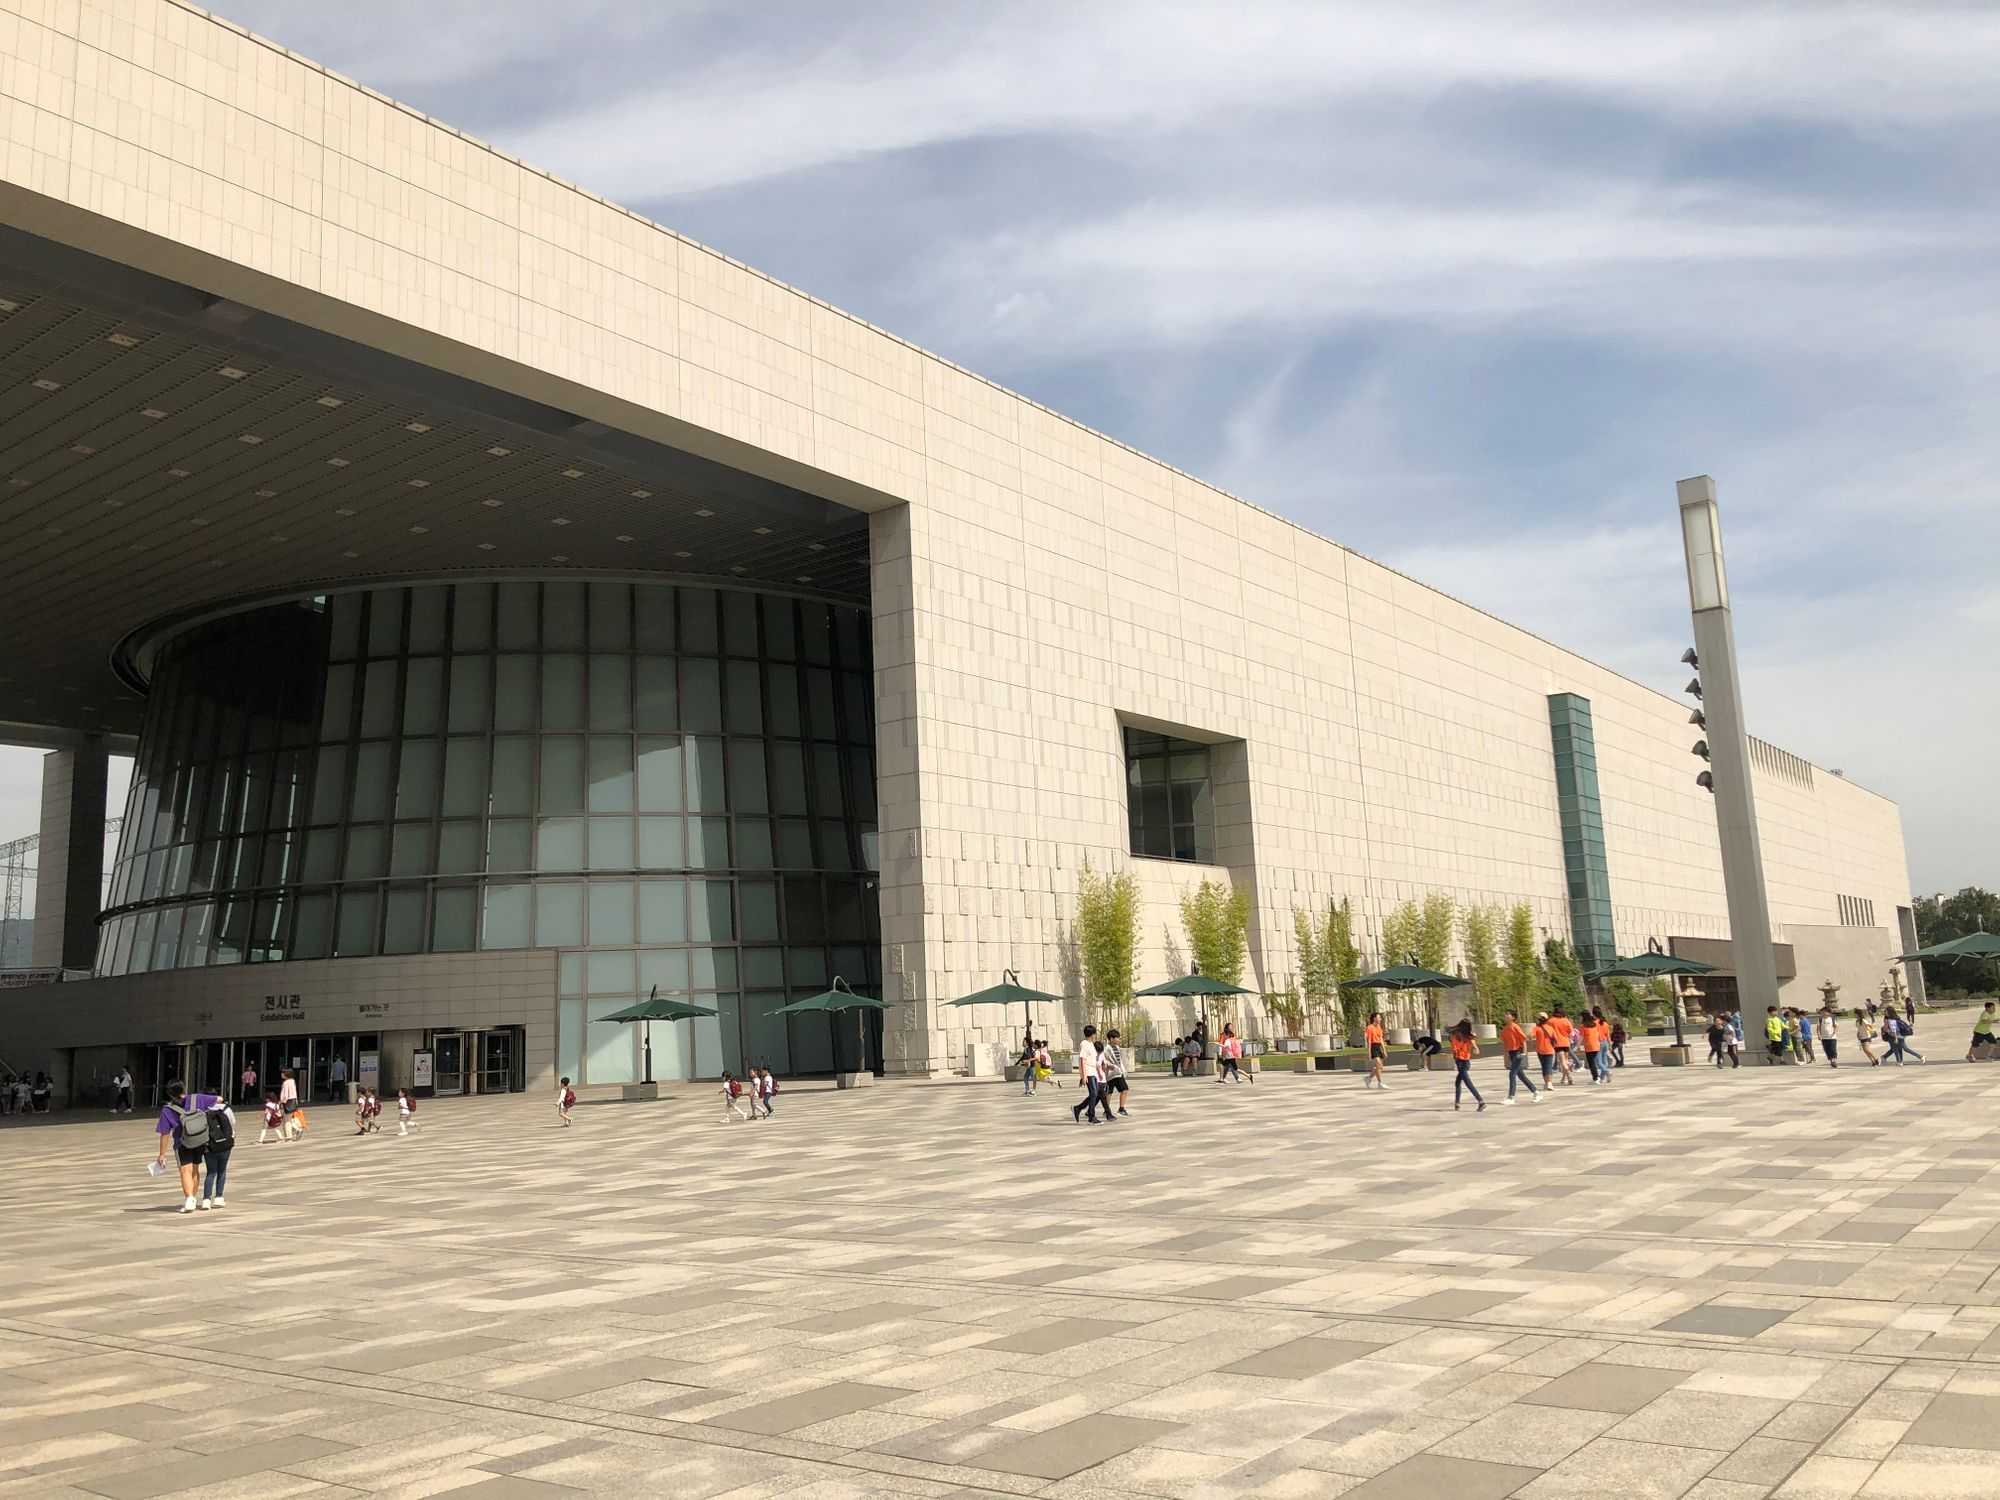 National Museum of Korea (국립중앙박물관) (Image by author)